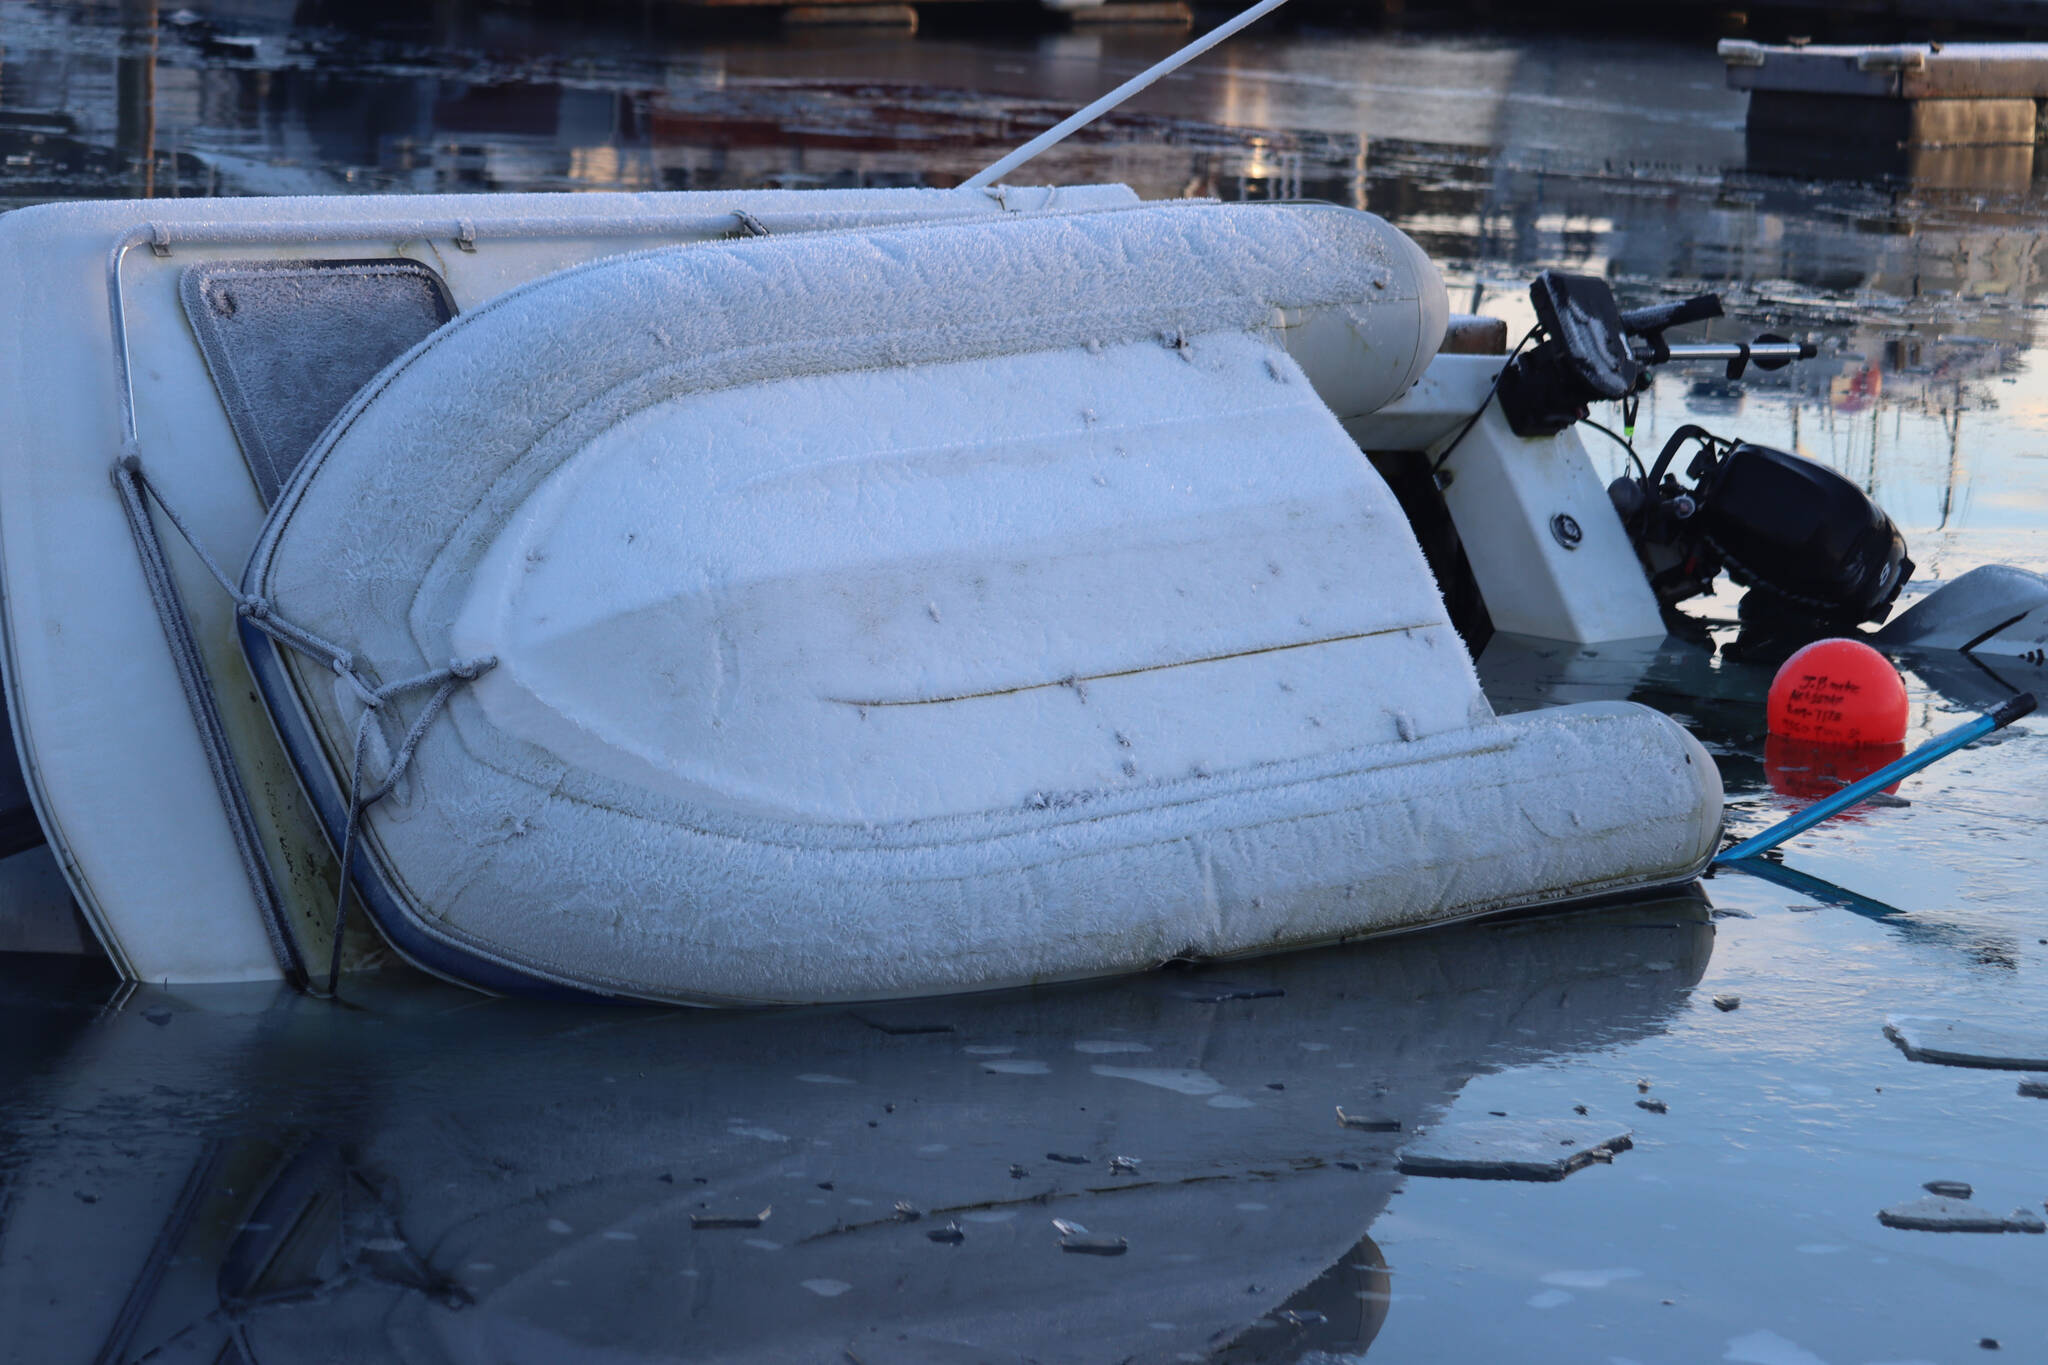 A boat sits half submerged at Fisherman’s Bend on Tuesday. According to the United States Coast Guard Maritime Information Exchange, the 26-foot recreational boat was built in 1990. (Jonson Kuhn / Juneau Empire)